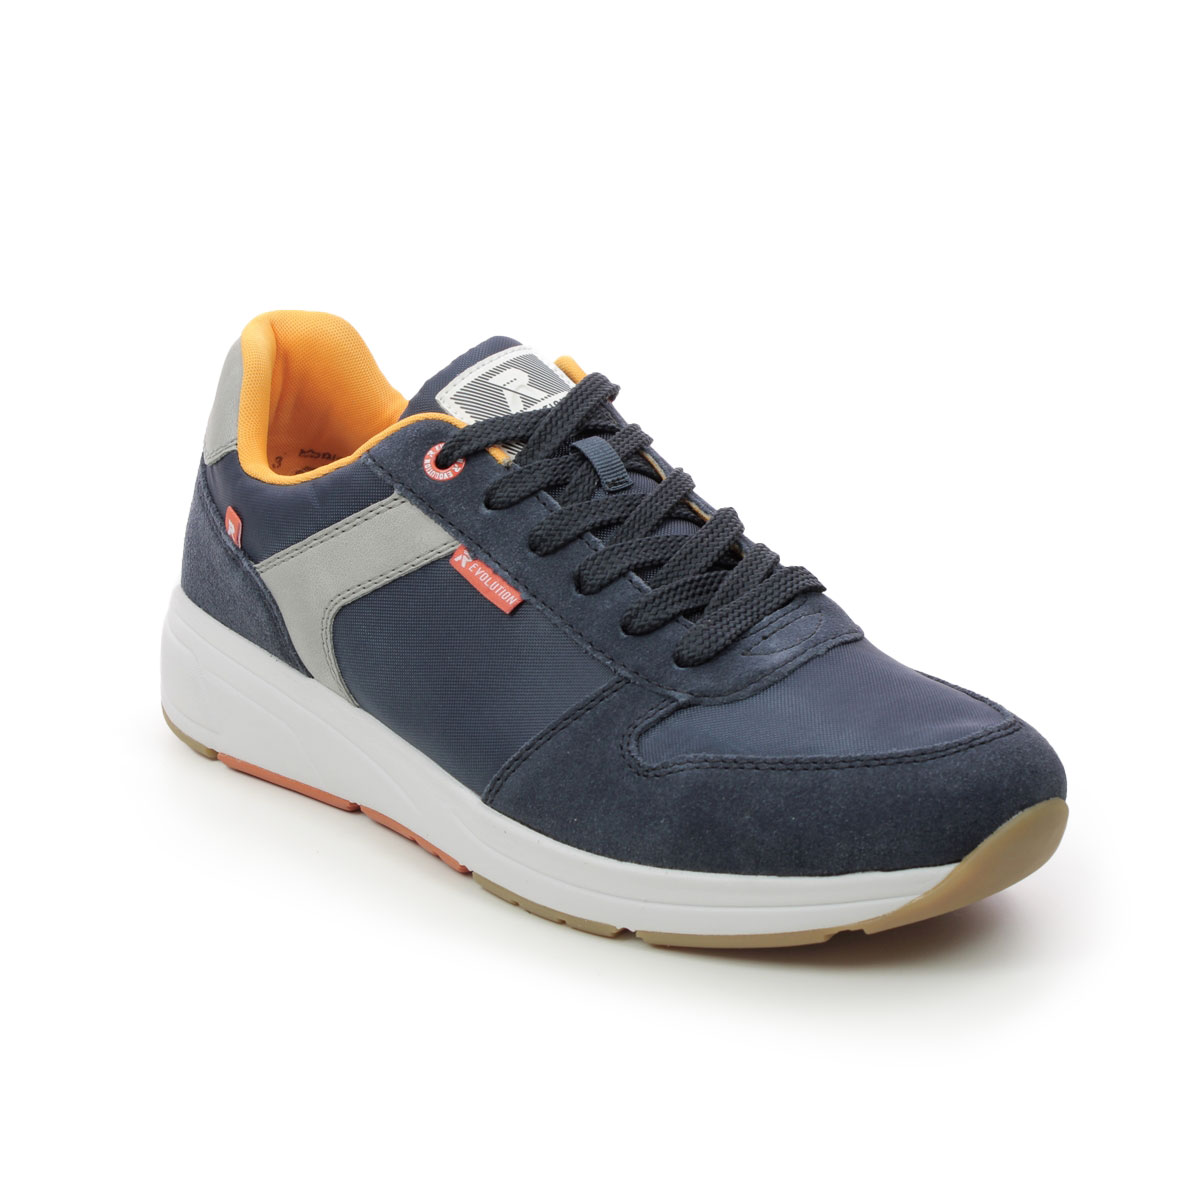 Rieker Archy Evo Navy Mens Trainers 07002-14 In Size 40 In Plain Navy